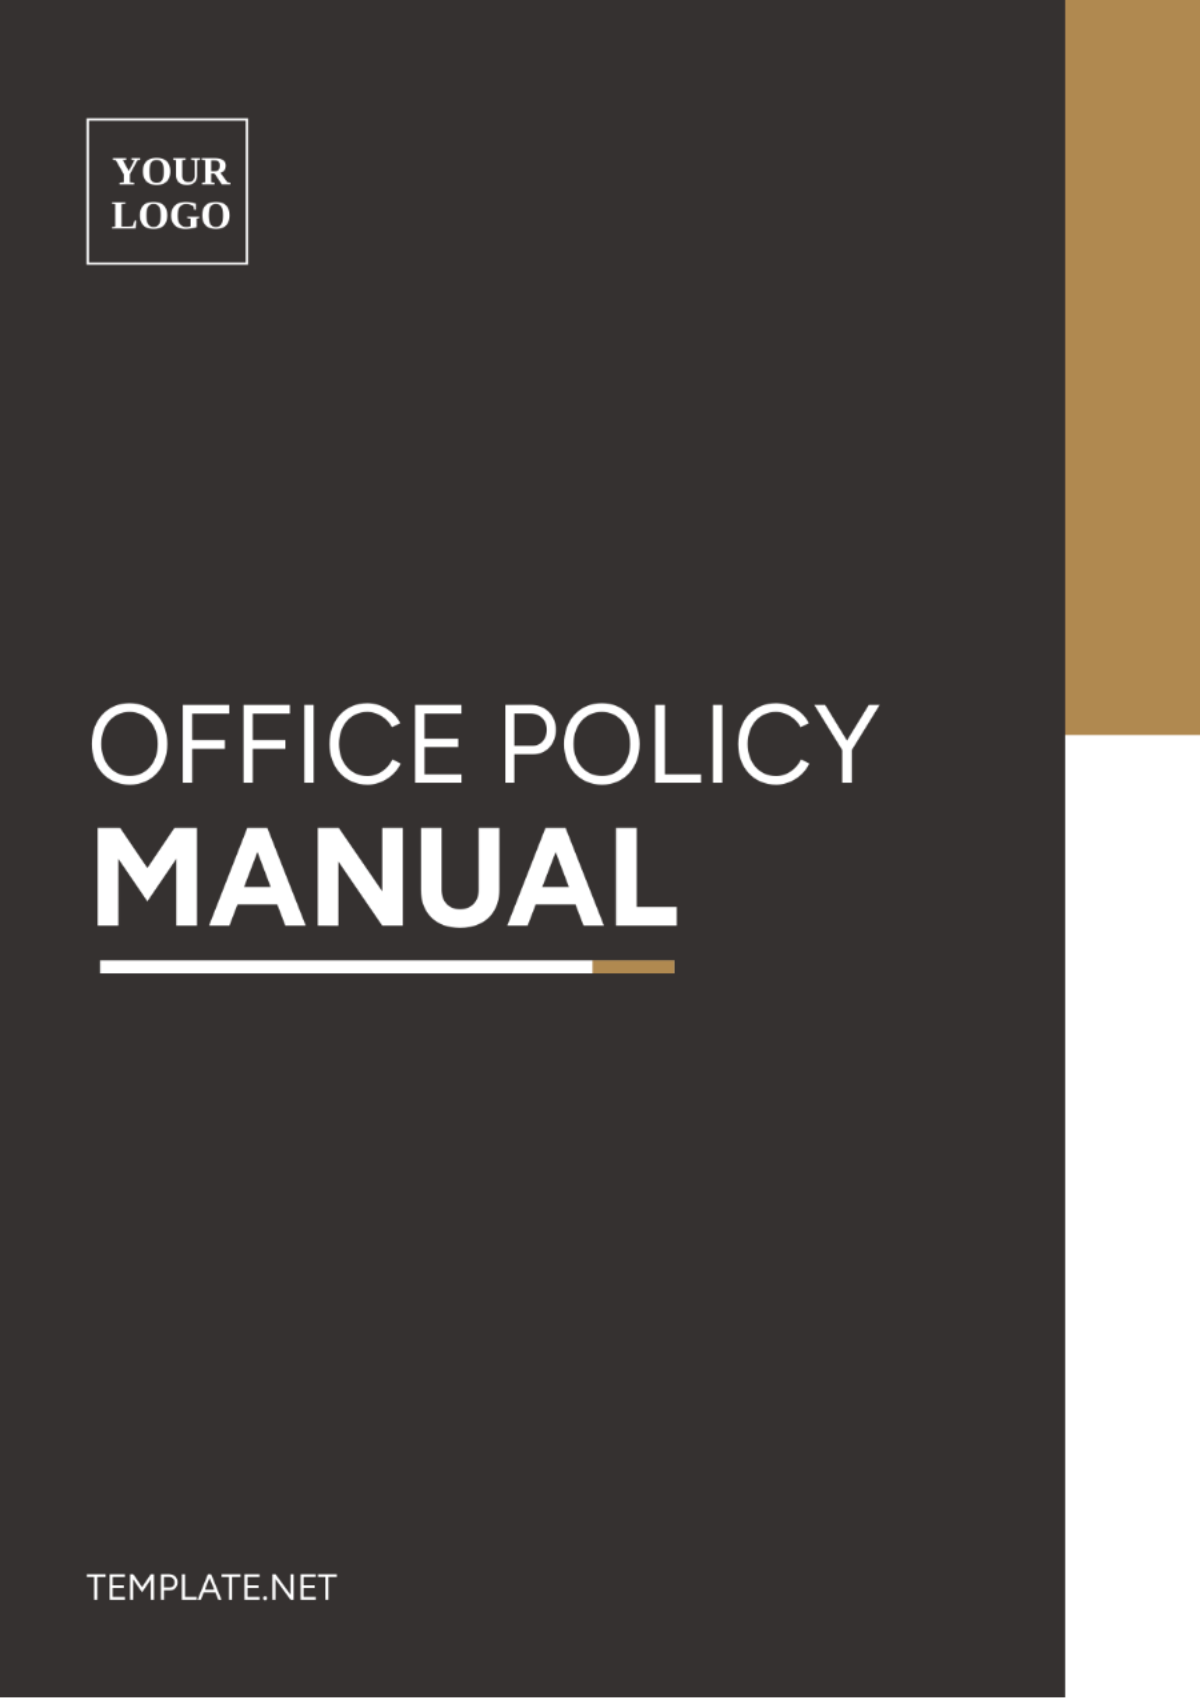 Free Office Policy Manual Template